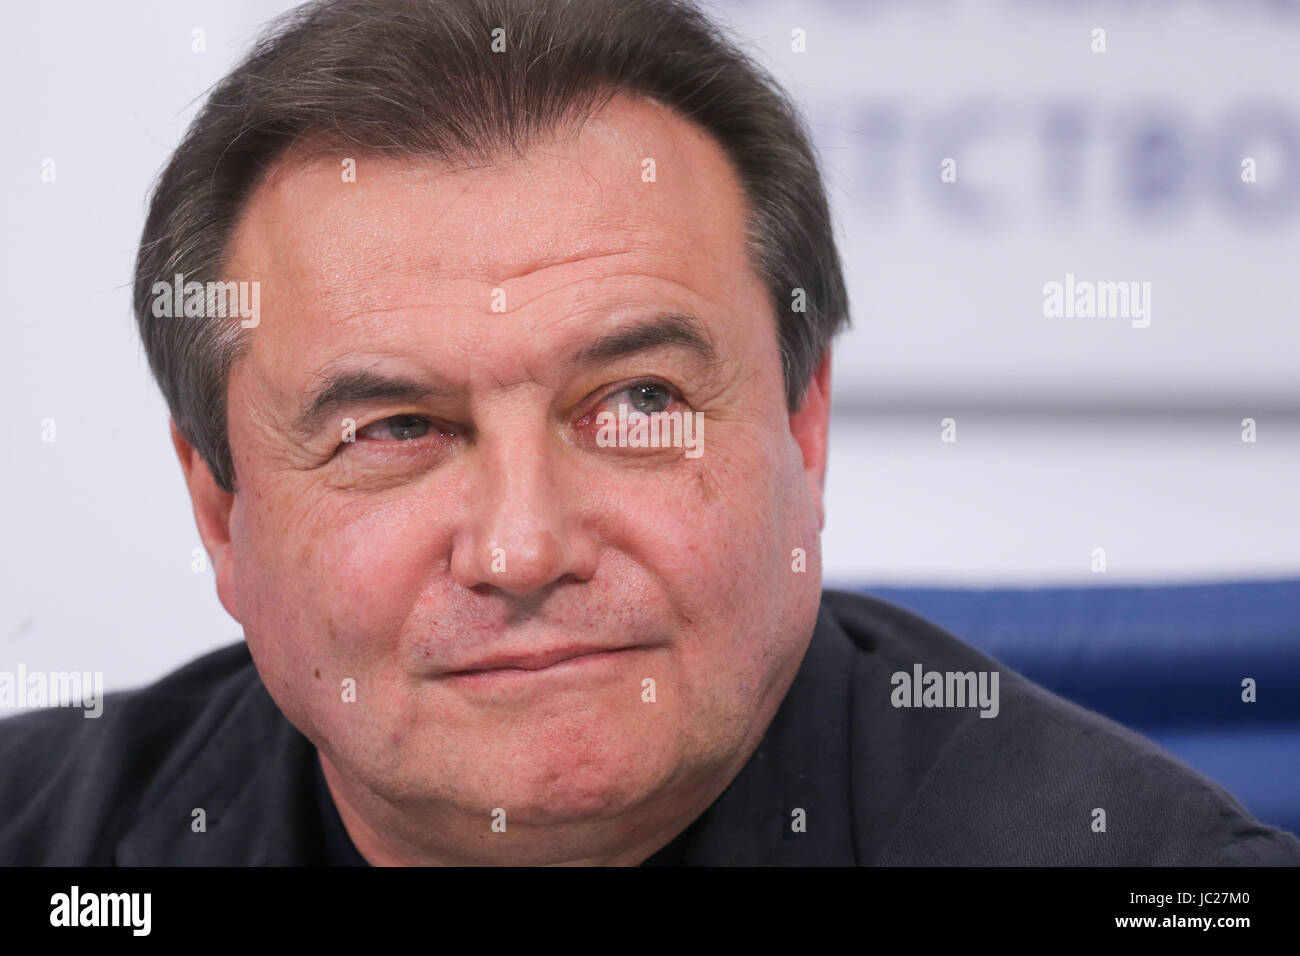 Moscow, Russia. 13th June, 2017. Film director Alexei Uchitel looks on at a press conference on his film Matilda. Credit: Victor Vytolskiy/Alamy Live News Stock Photo